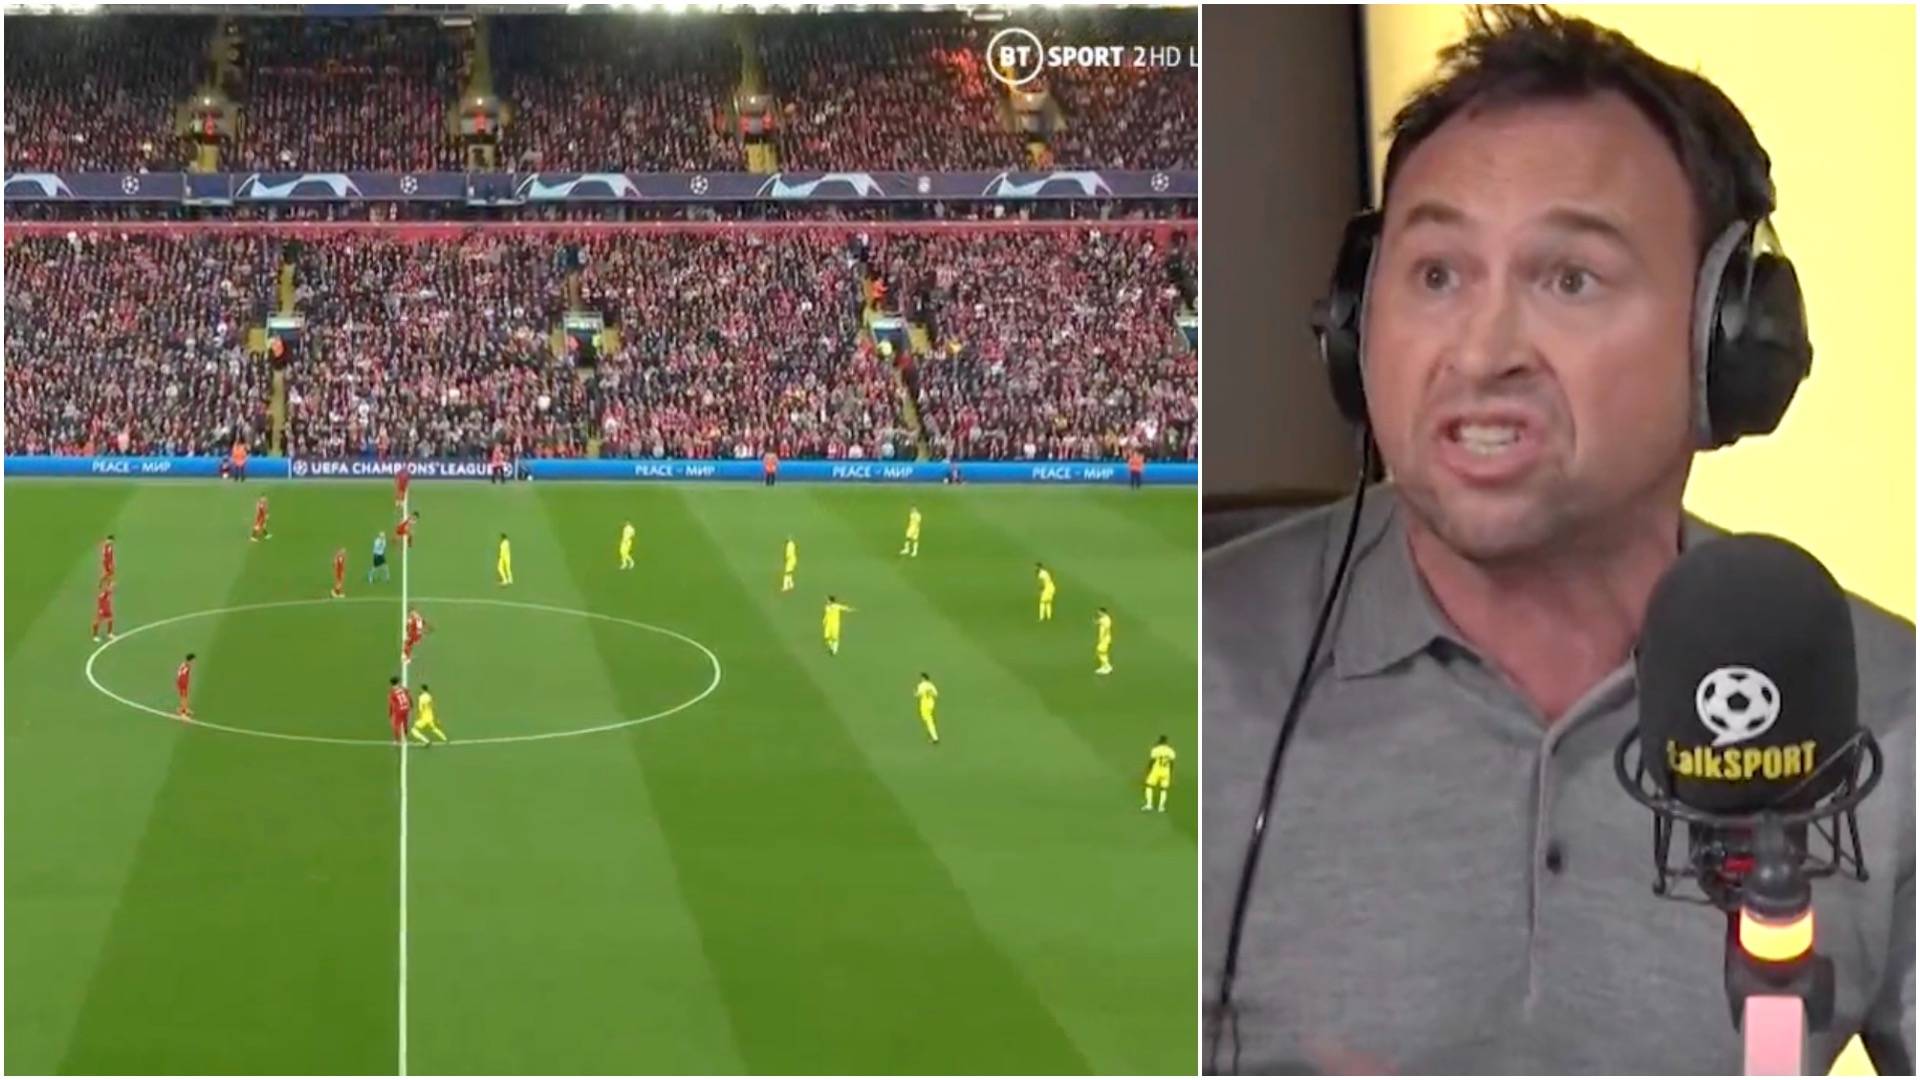 ‘Villarreal are a disgrace!’ - Pundit loses his head and goes viral after Liverpool’s 2-0 win